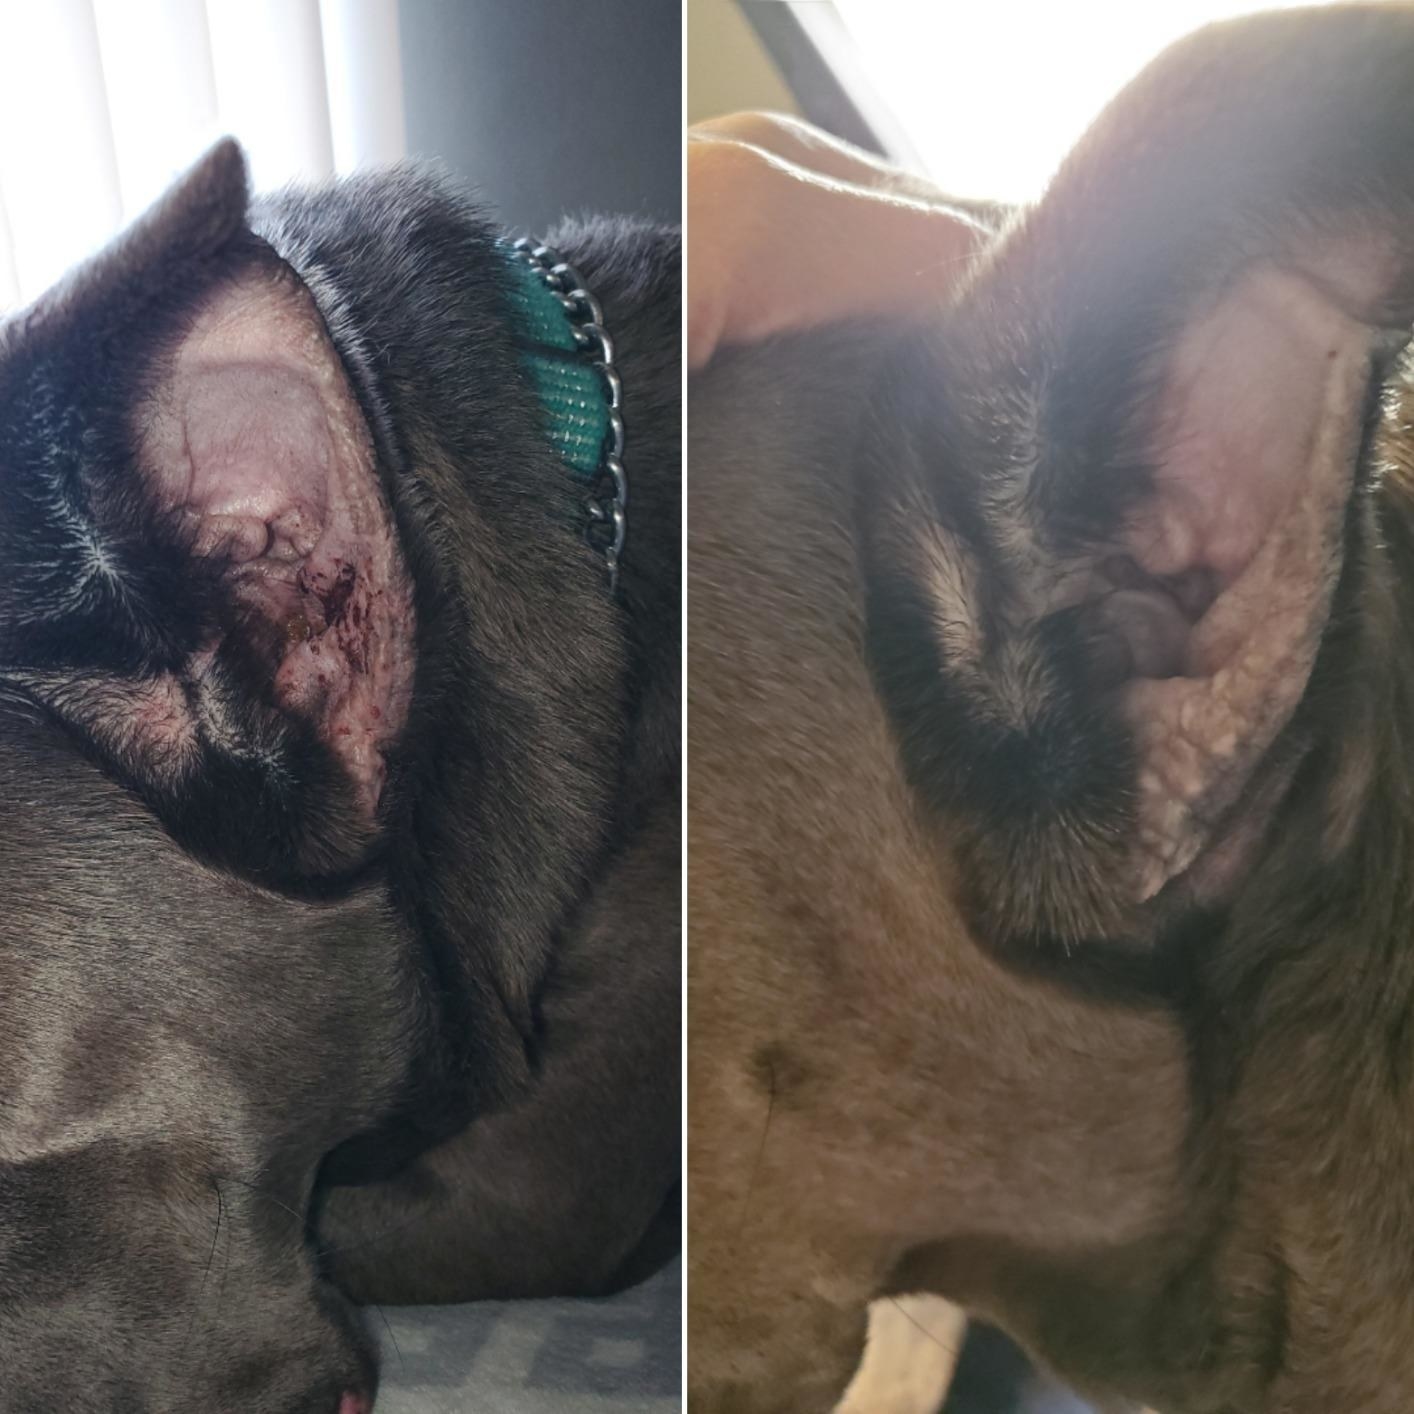 A dog&#x27;s ear before and after using the product